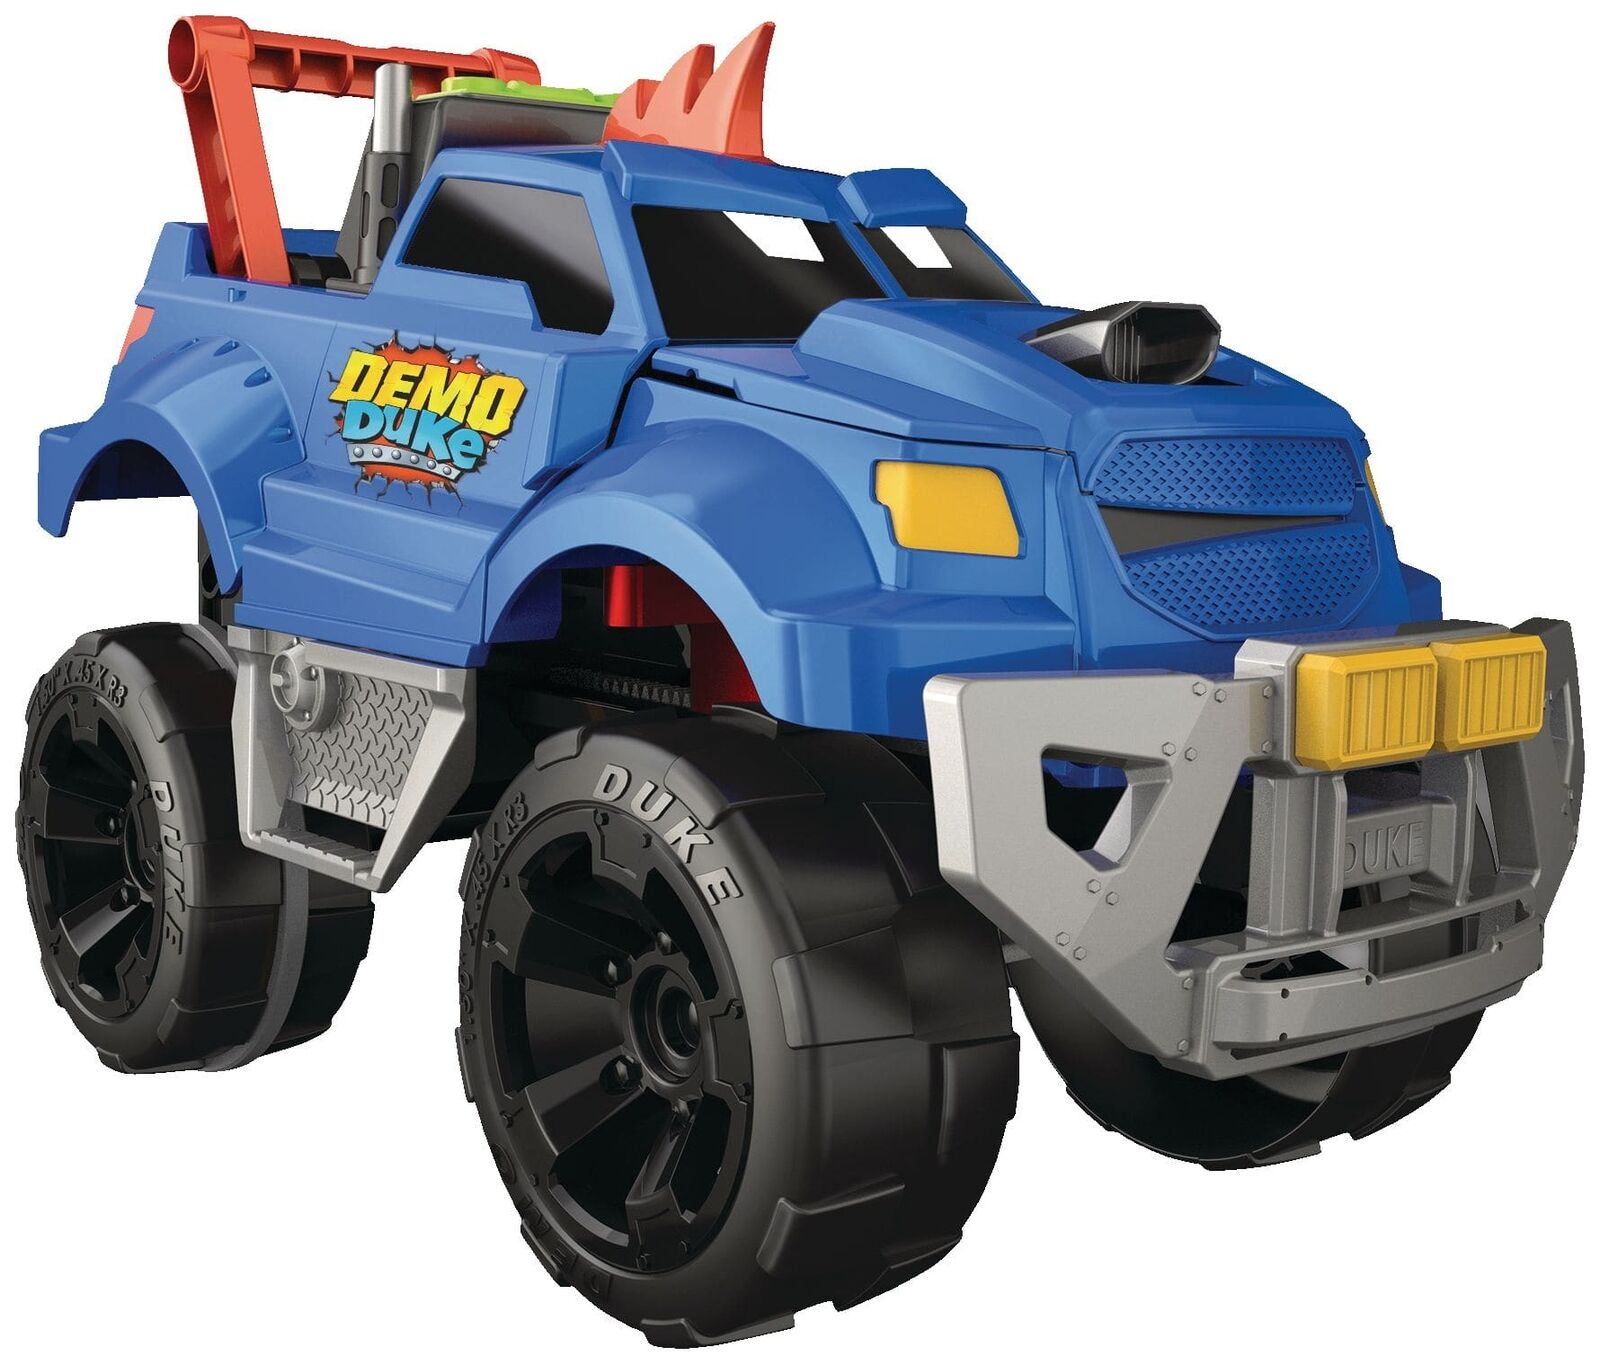 Demo Duke Crashing & Transforming Vehicle Toy w/ Sound For Toddlers, Ages 4+